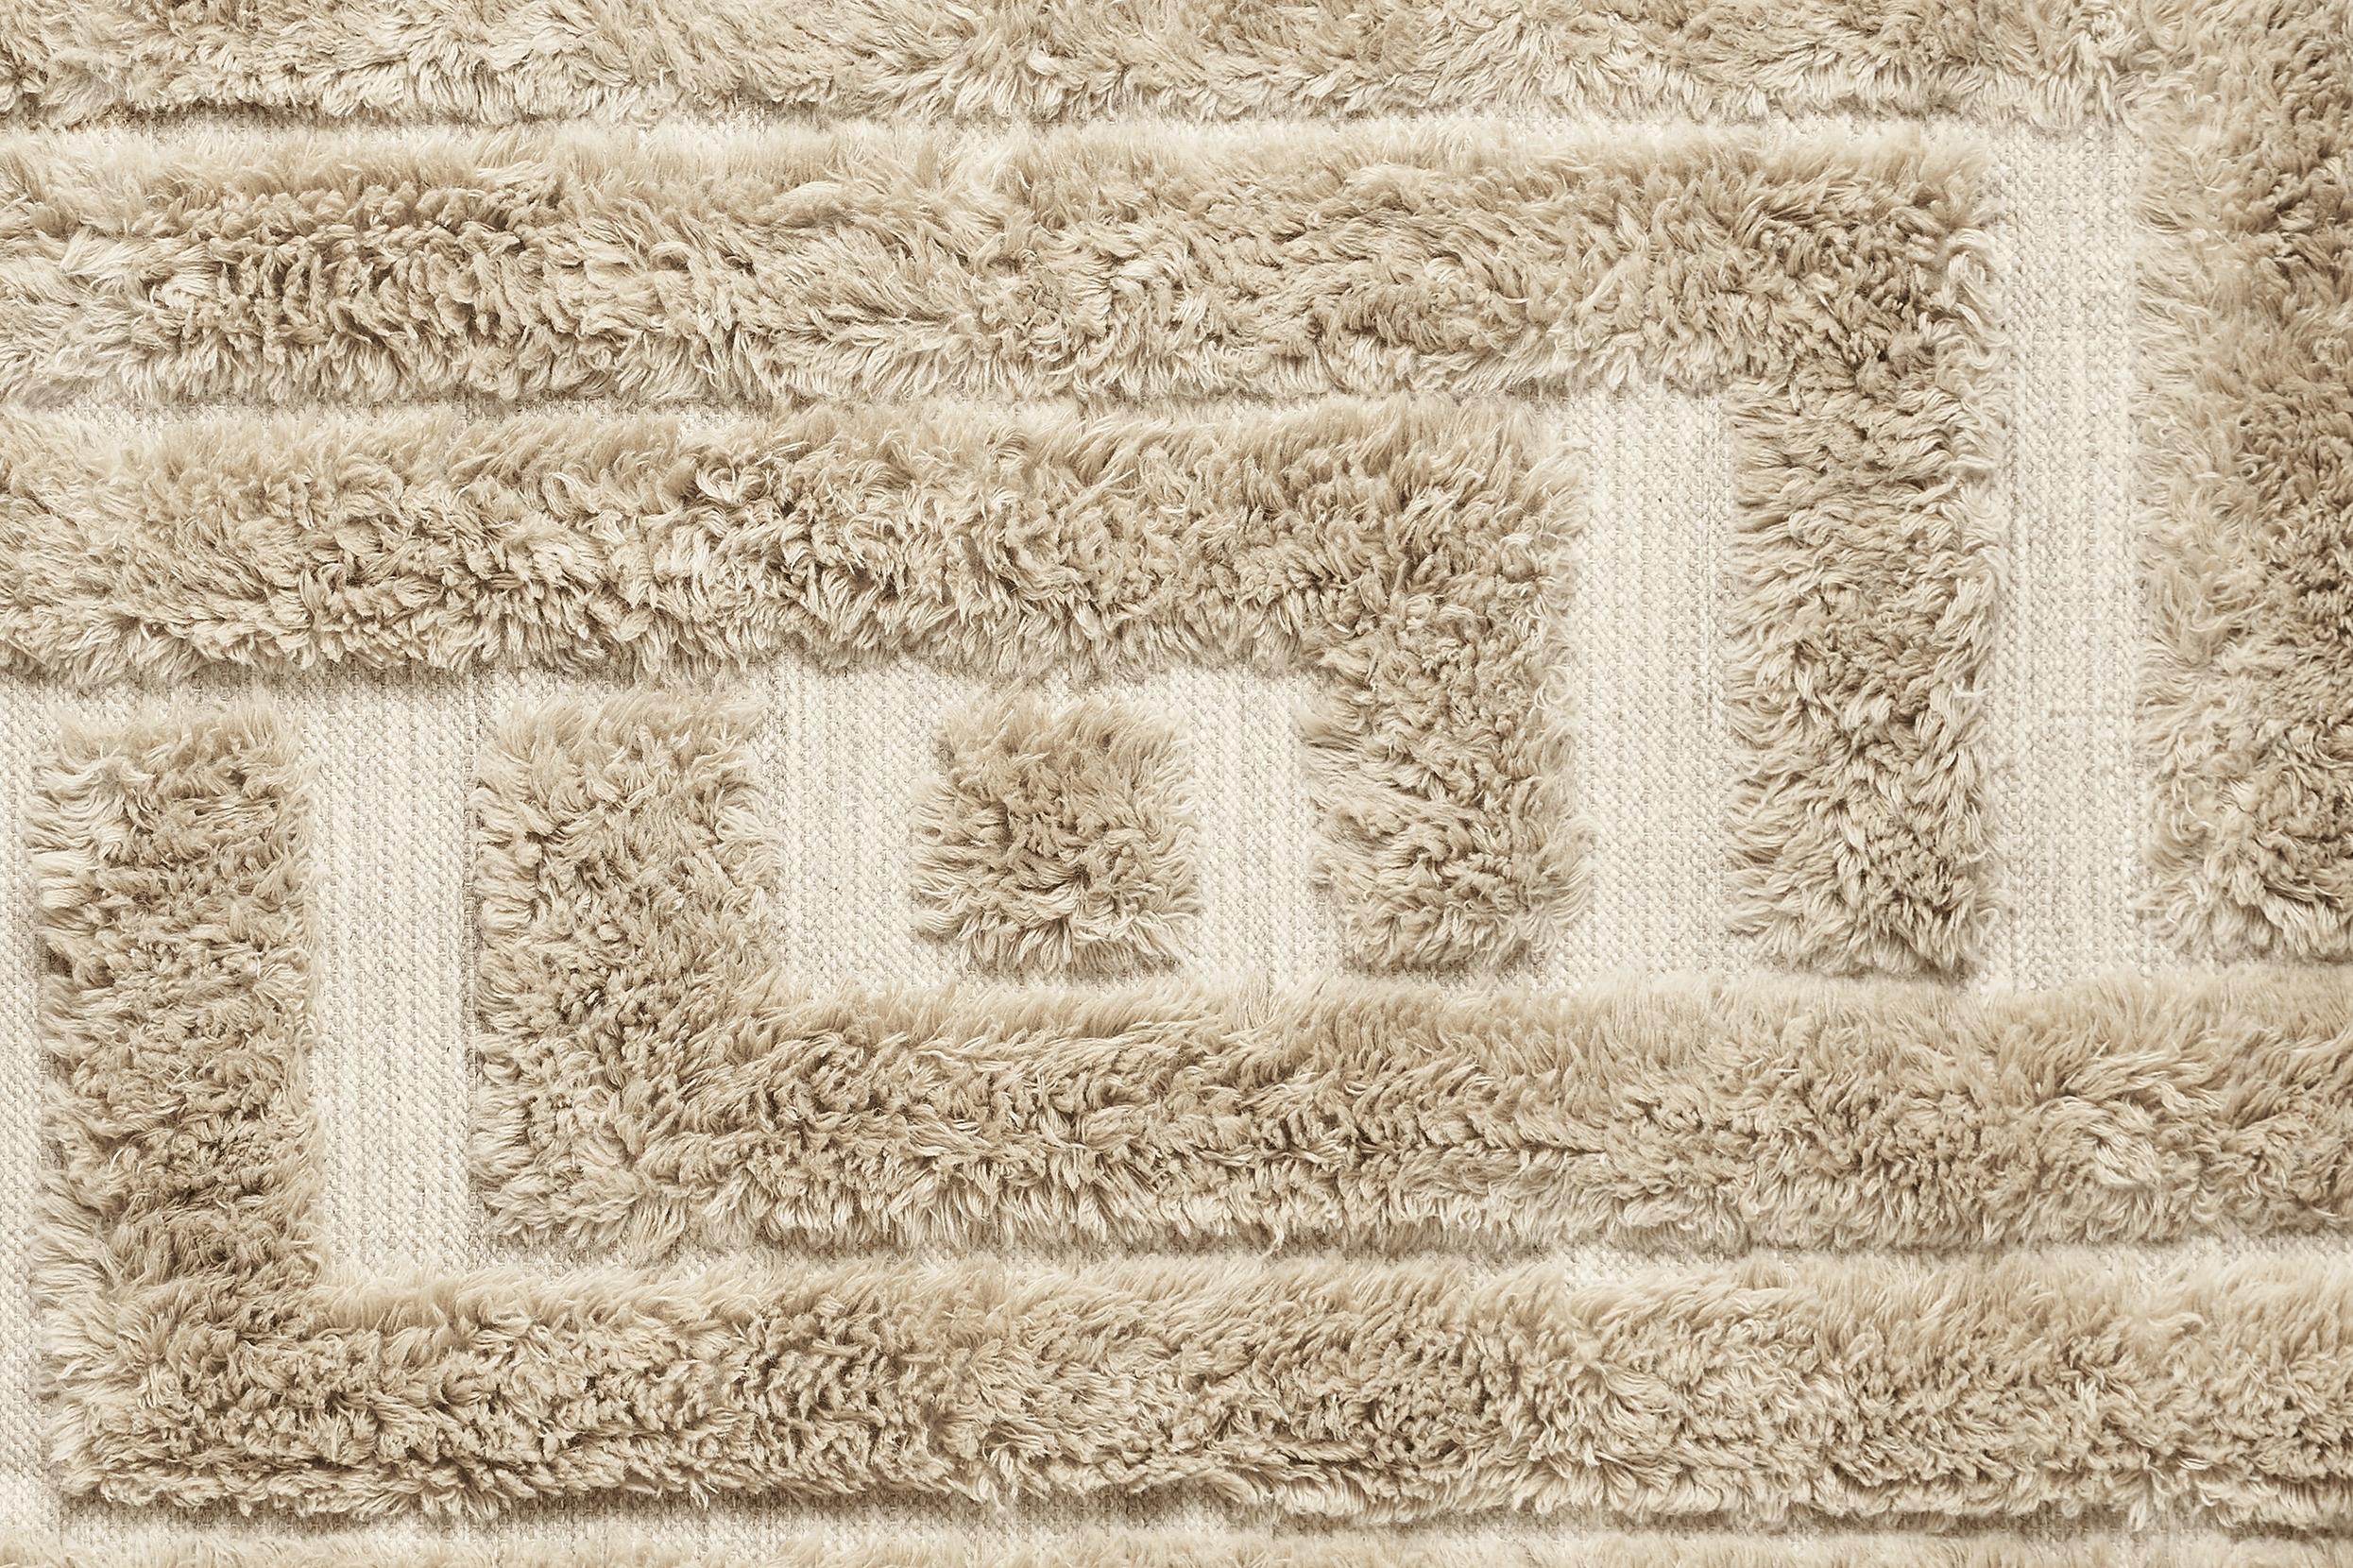 DD Shaggy Labyrinth rug is hand woven and made of 100% wool and has a unique pattern as some parts of the rug are flat weave and some parts a shaggy pile and gets a unique look with Its high and low effect. 

Material: Hand woven 100 % wool.